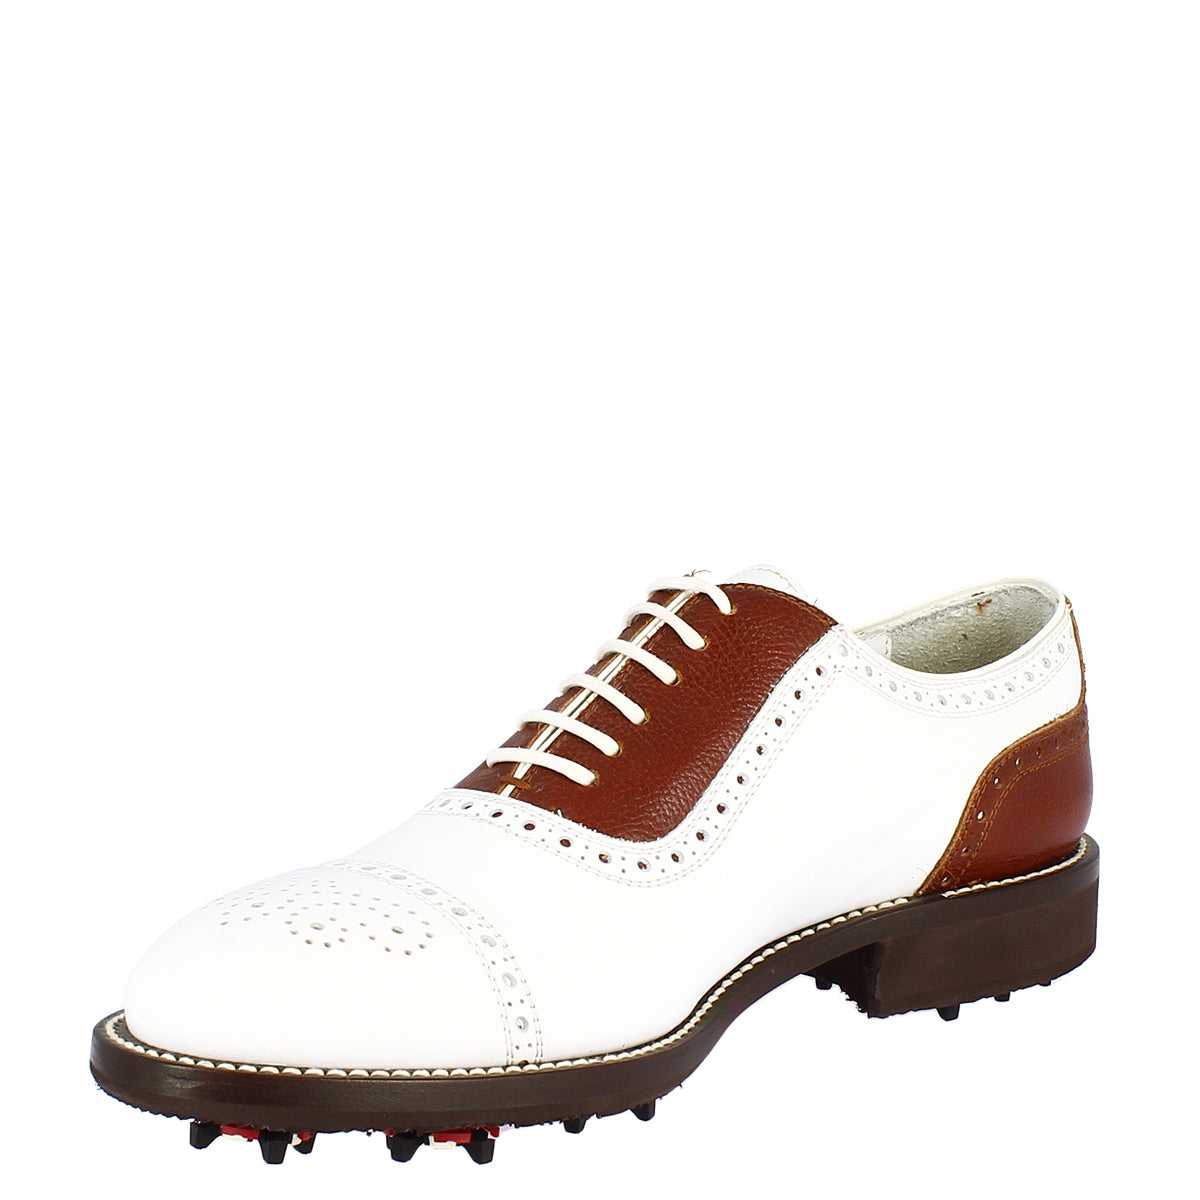 Handcrafted white leather brown classic men's golf shoes